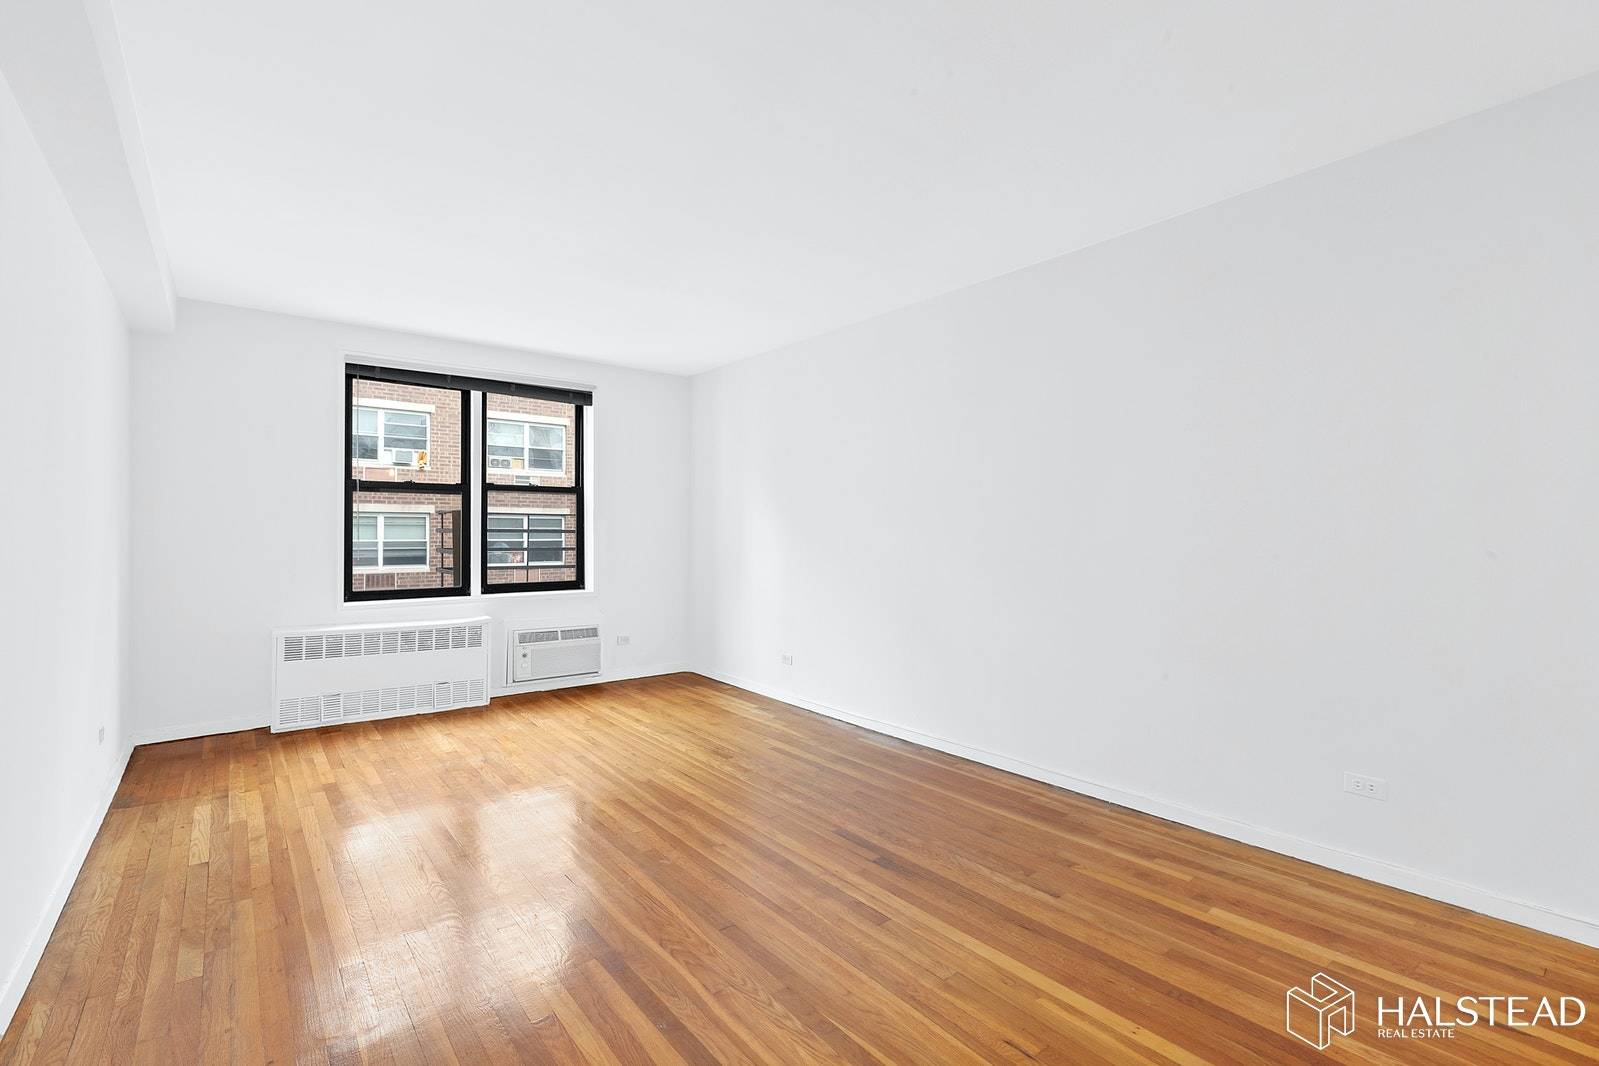 Spacious and Quiet, Top Floor, One Bedroom Home, perfectly located on the magical block of East 18th Street, a beautiful, tree lined, residential block, in the heart of Gramercy.